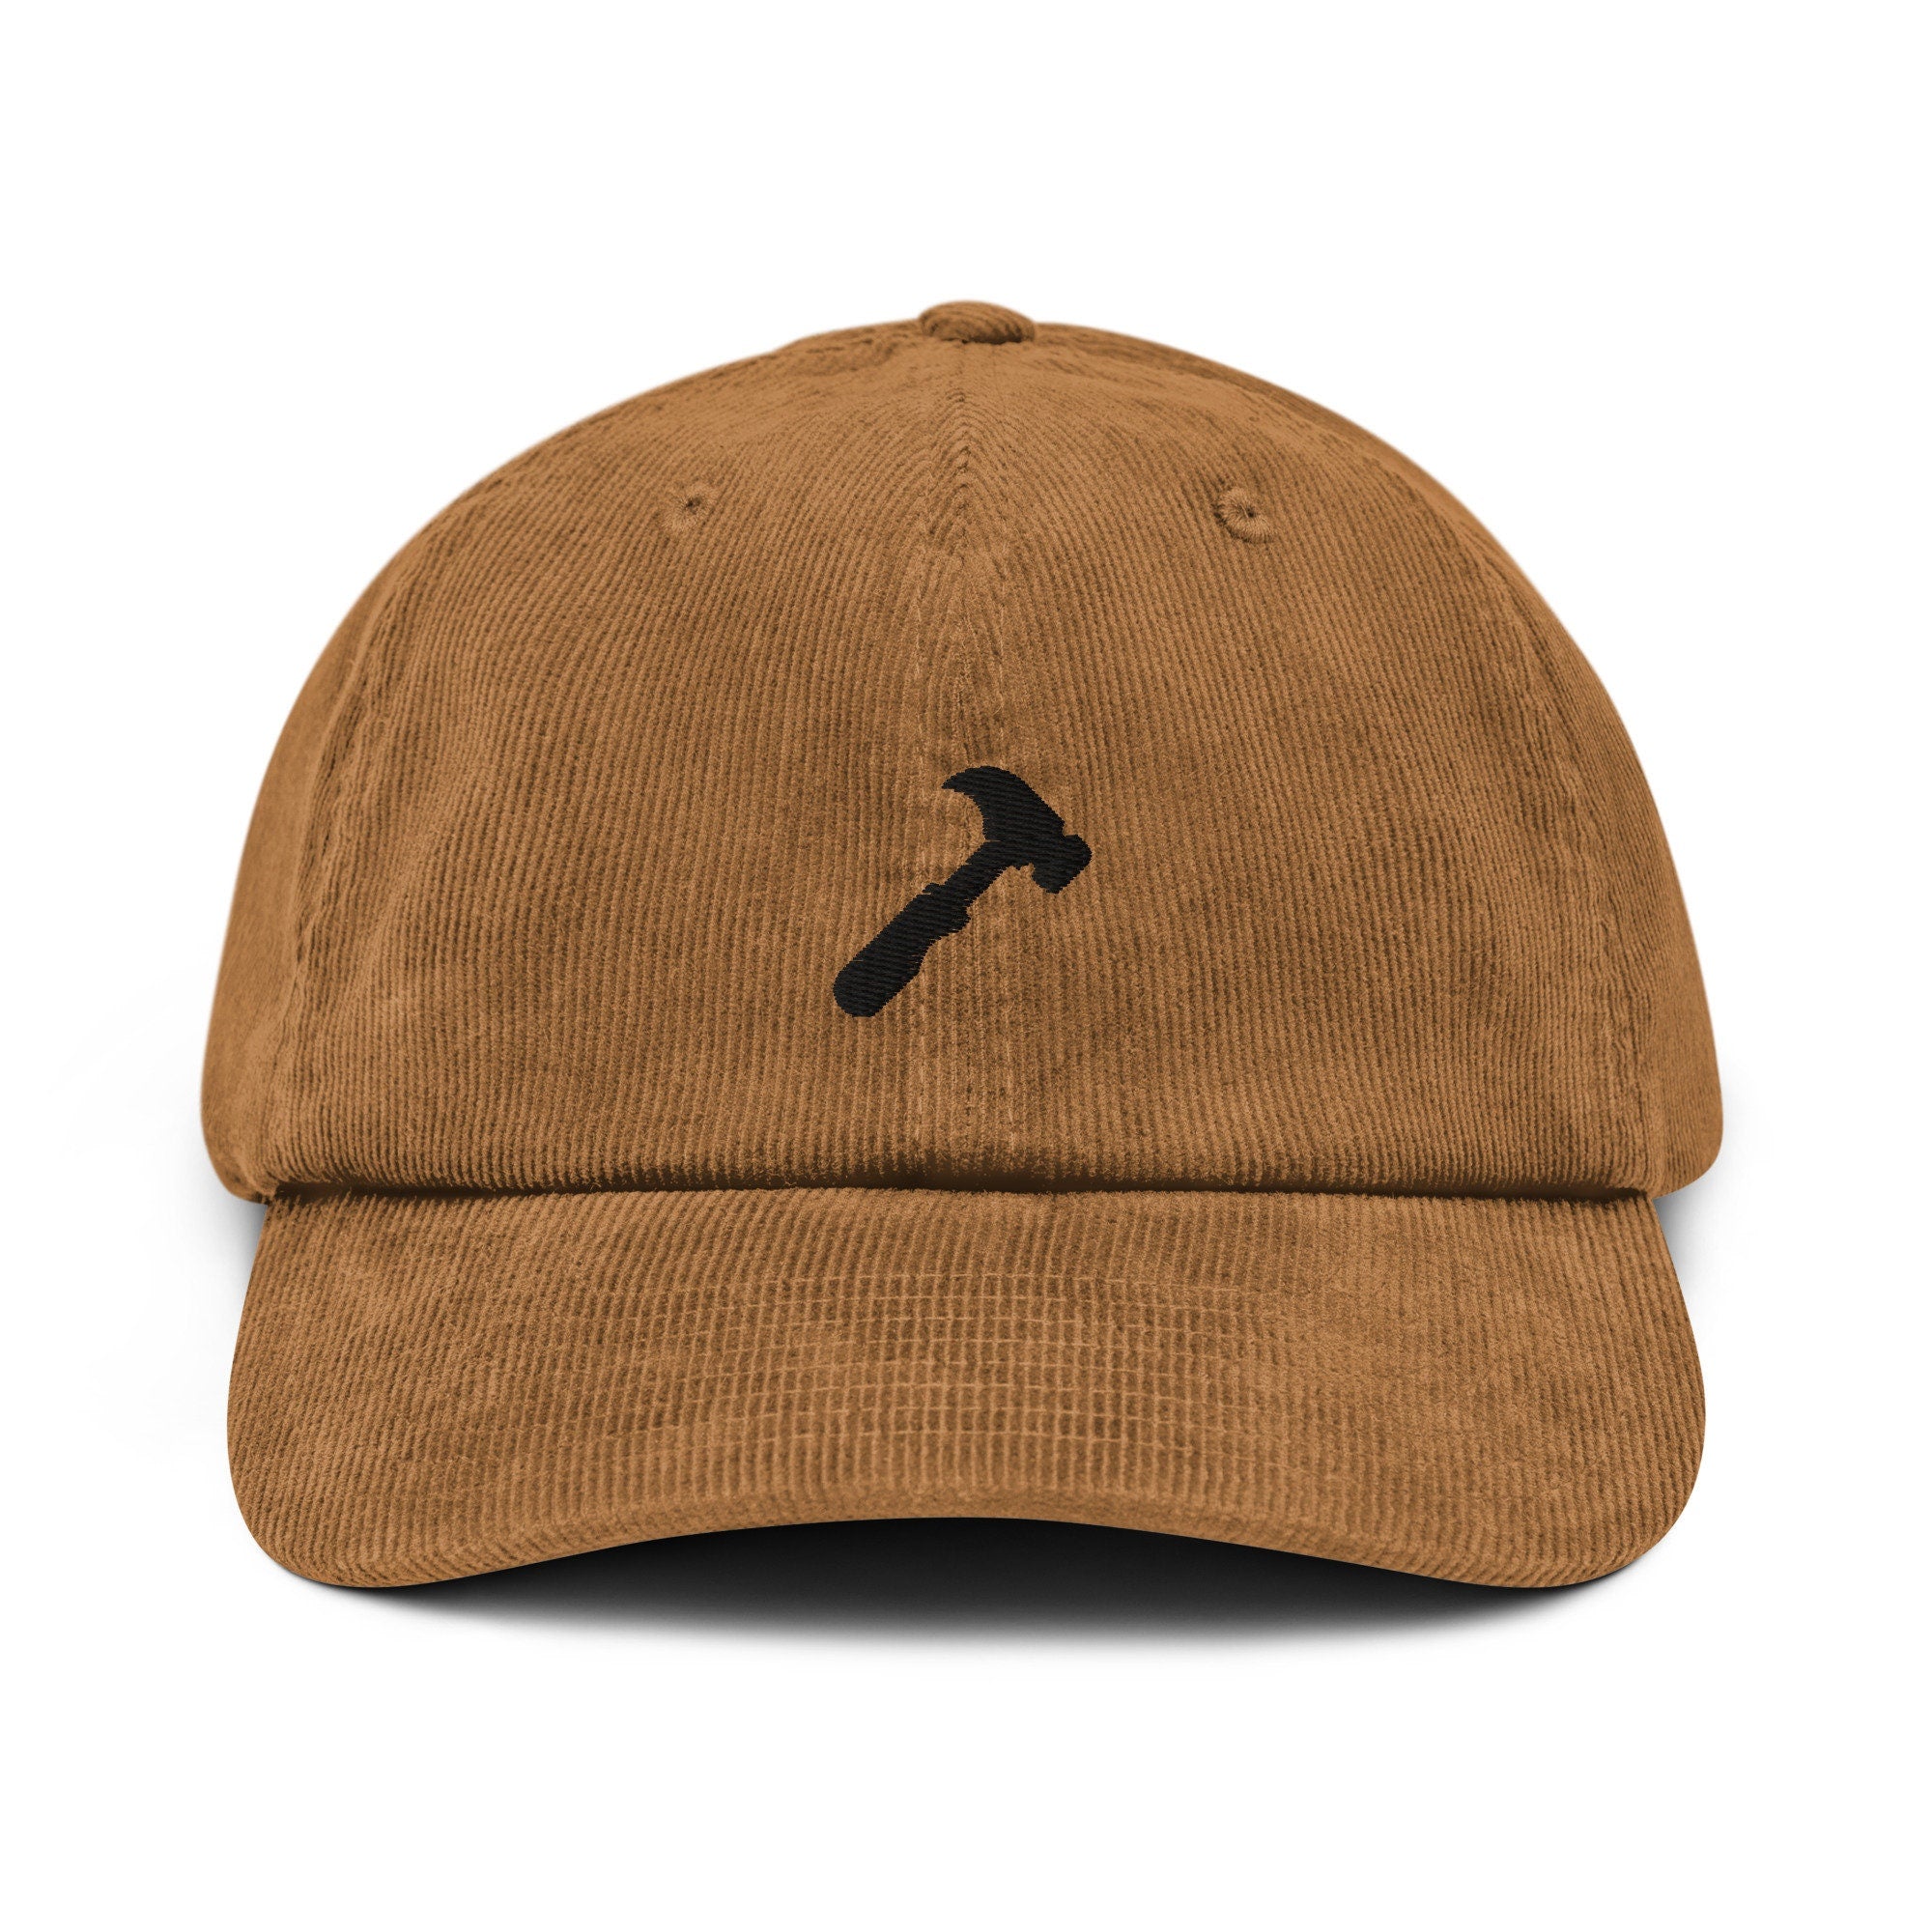 Hammer Corduroy Hat, Handmade Embroidered Corduroy Dad Cap - Multiple Colors